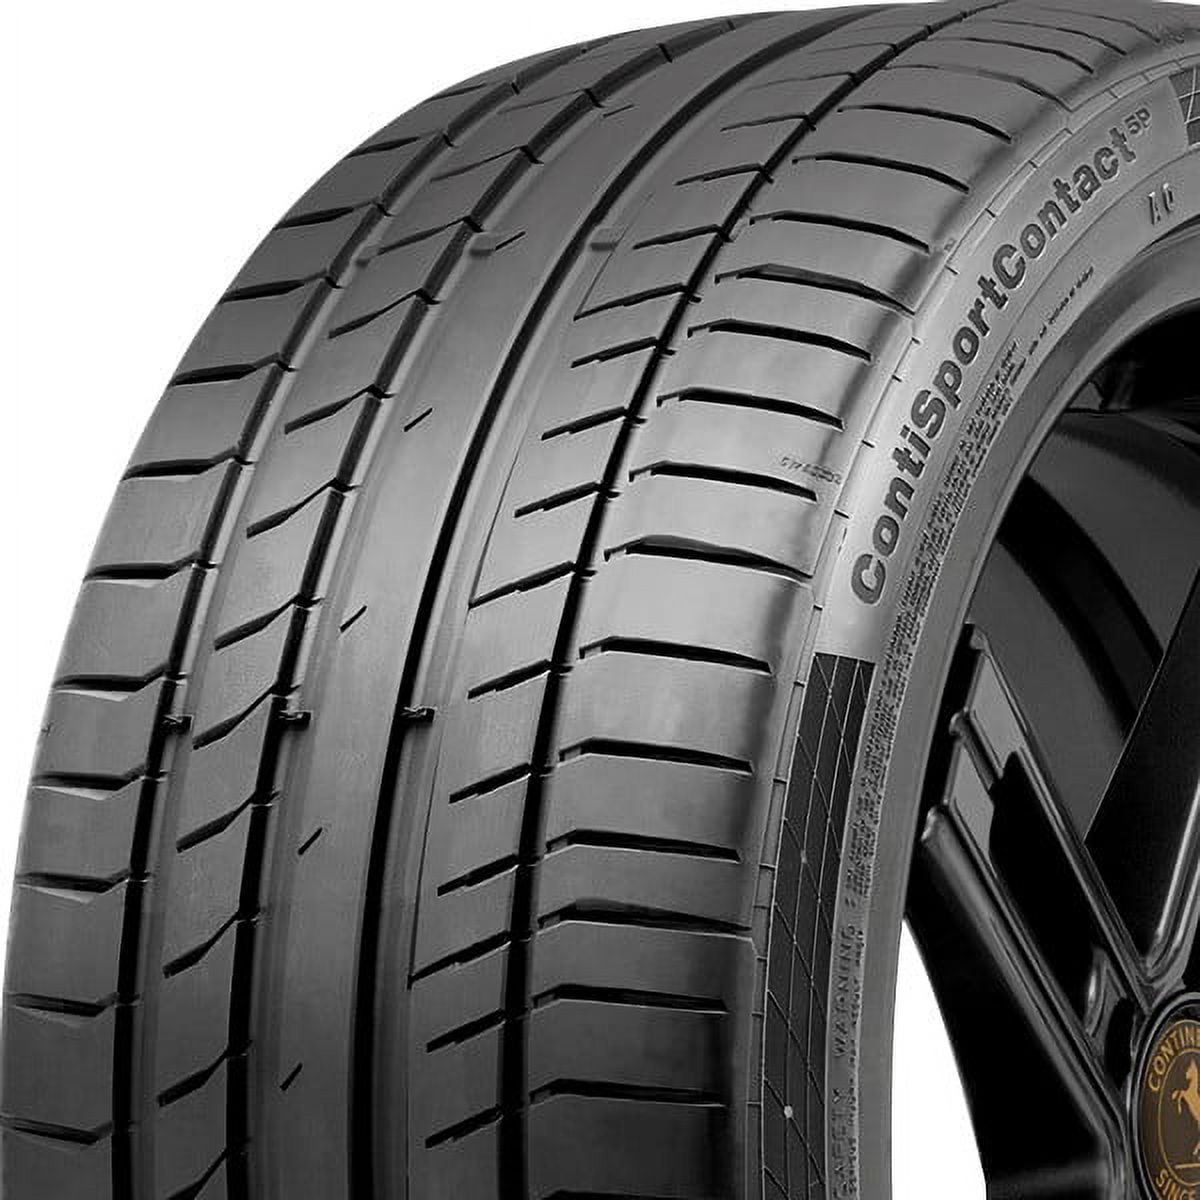 ContiSportContact BSW Ultra Performance High 5 Continental 91Y Tire 225/45R17